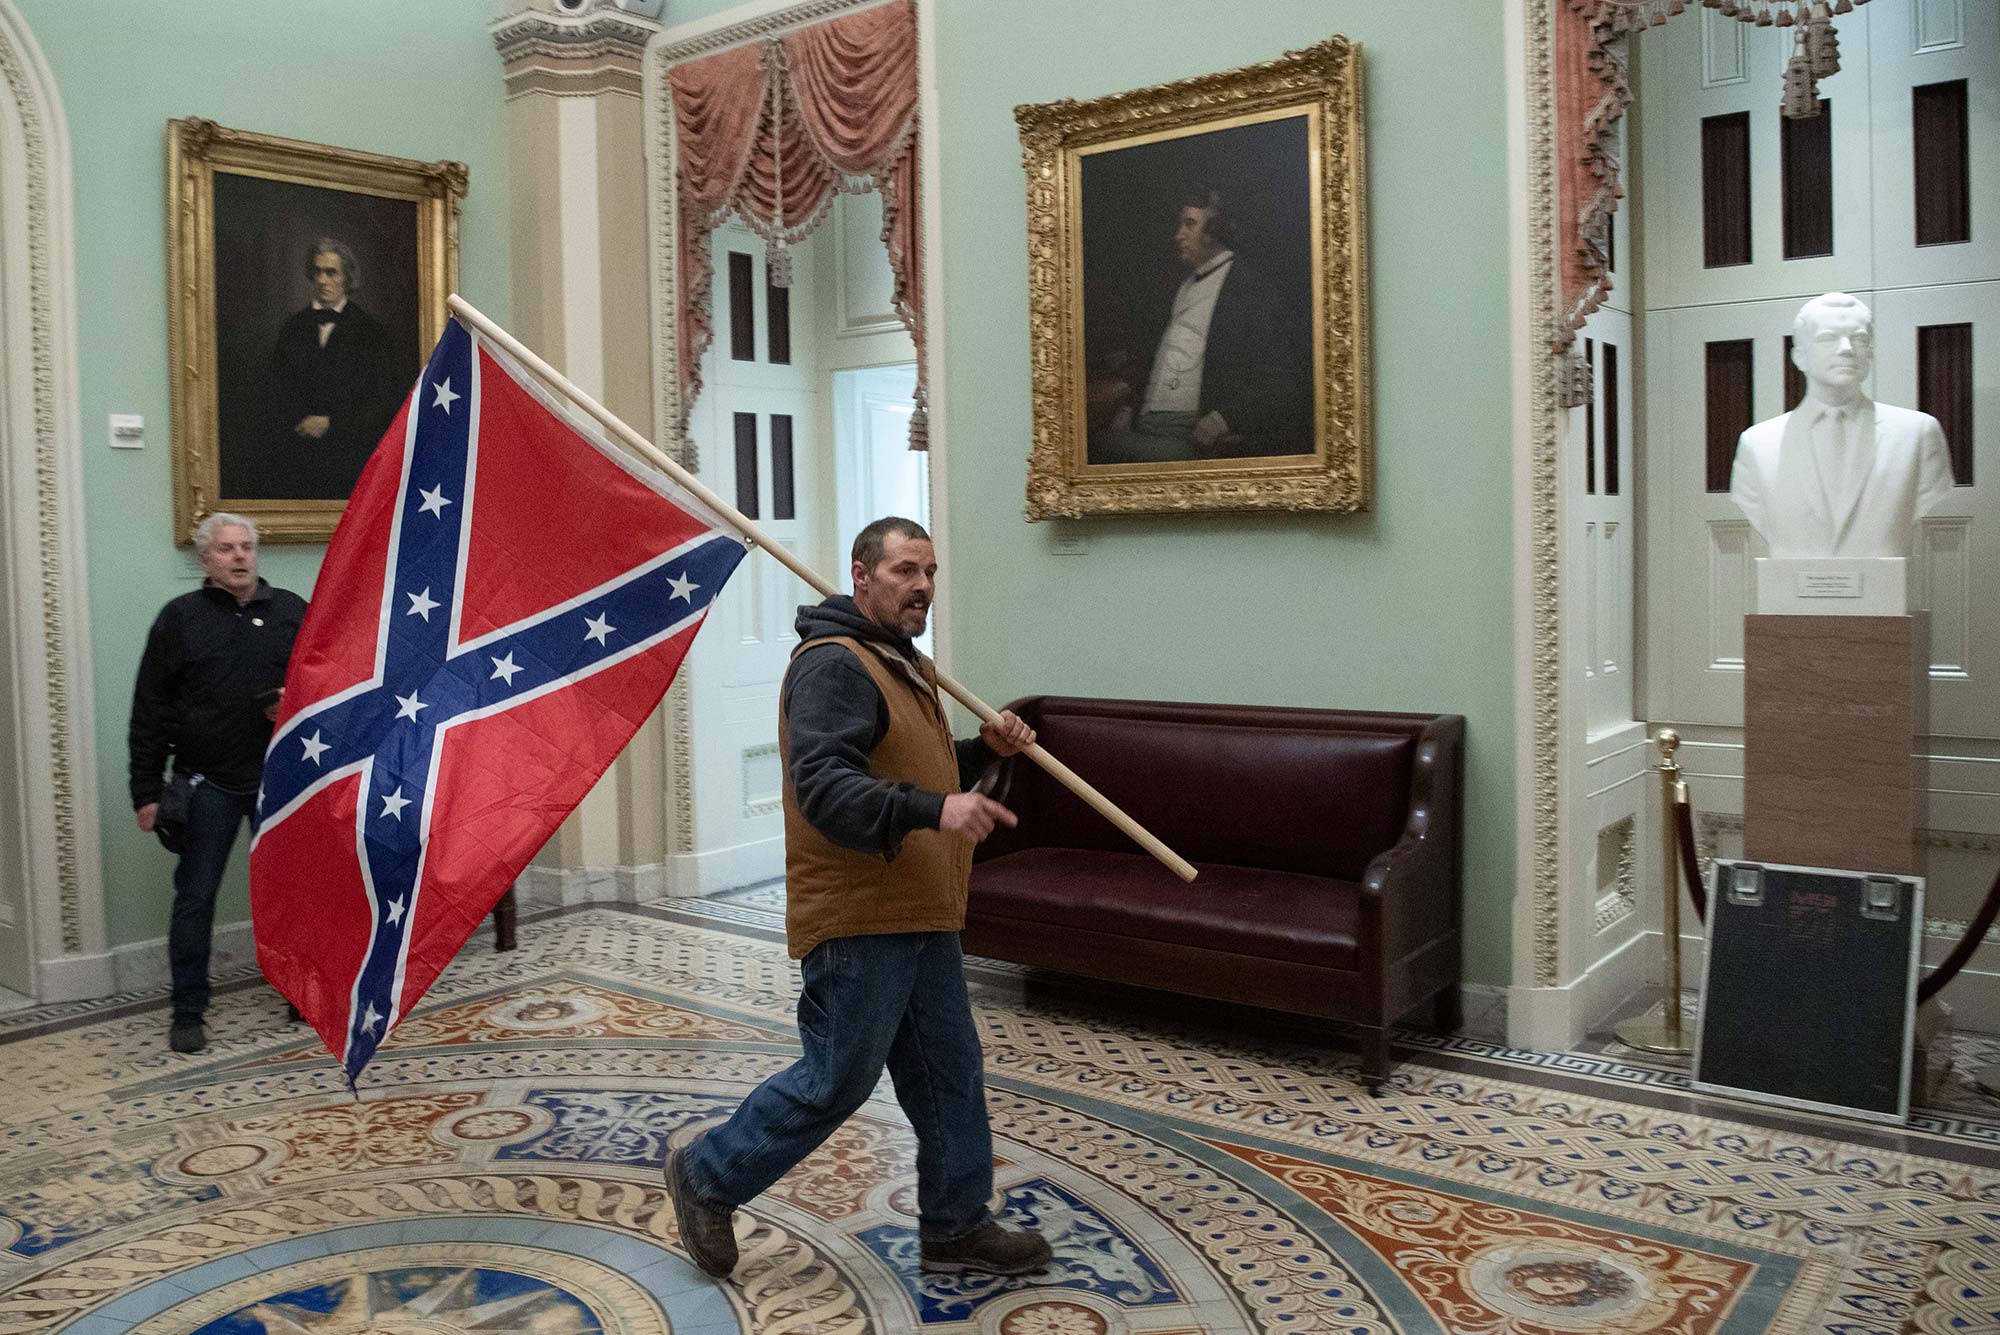 Photo of a supporter of US President Donald Trump, dressing in jeans, a tan vest and sweatshirt, carrying a Confederate flag in the US Capitol Rotunda during the insurrection on January 6, 2021, in Washington, DC. Behind him, a security guard looks on.